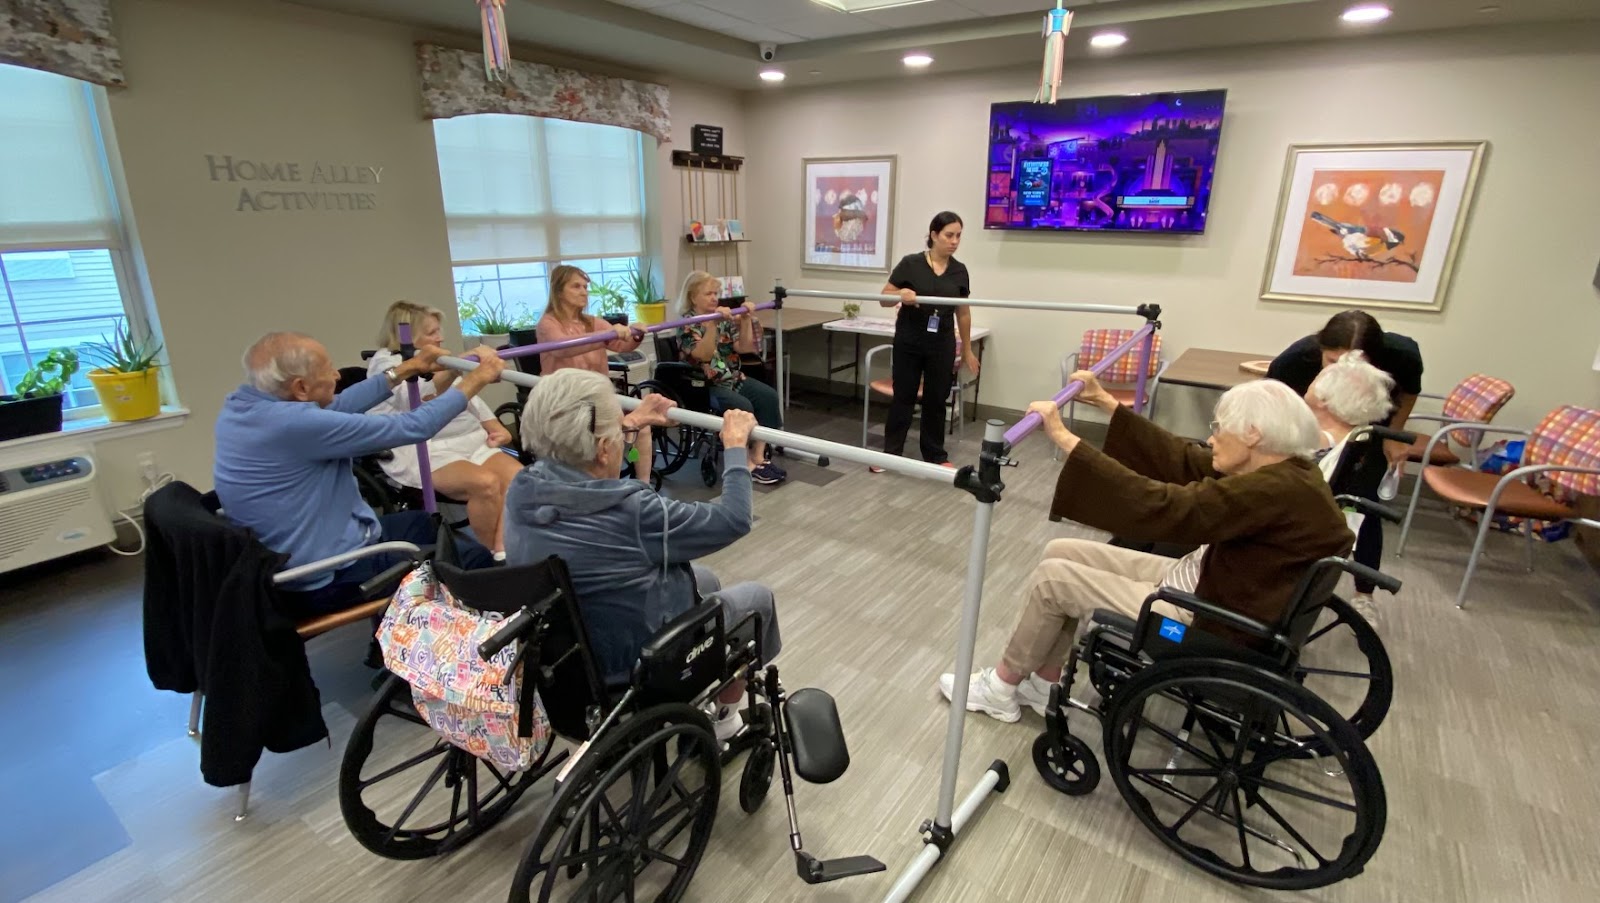 A group of seniors in wheelchairs receiving physical therapy help